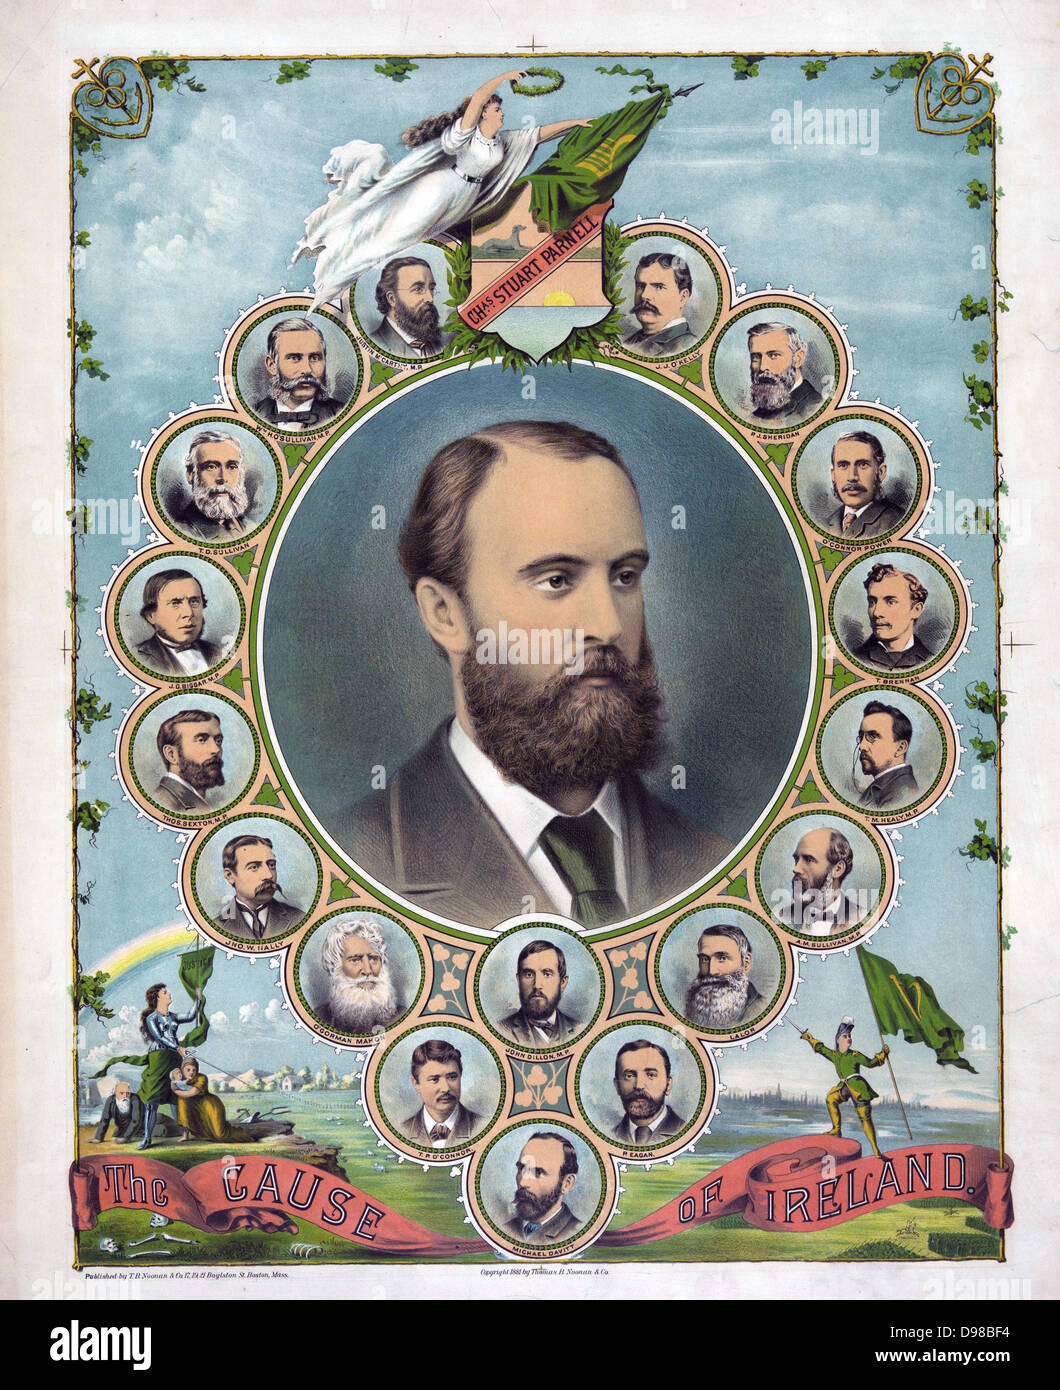 The Cause of Ireland: Portrait of Charles Stewart Parnell (1846-1891) Irish  nationalist, political leader and